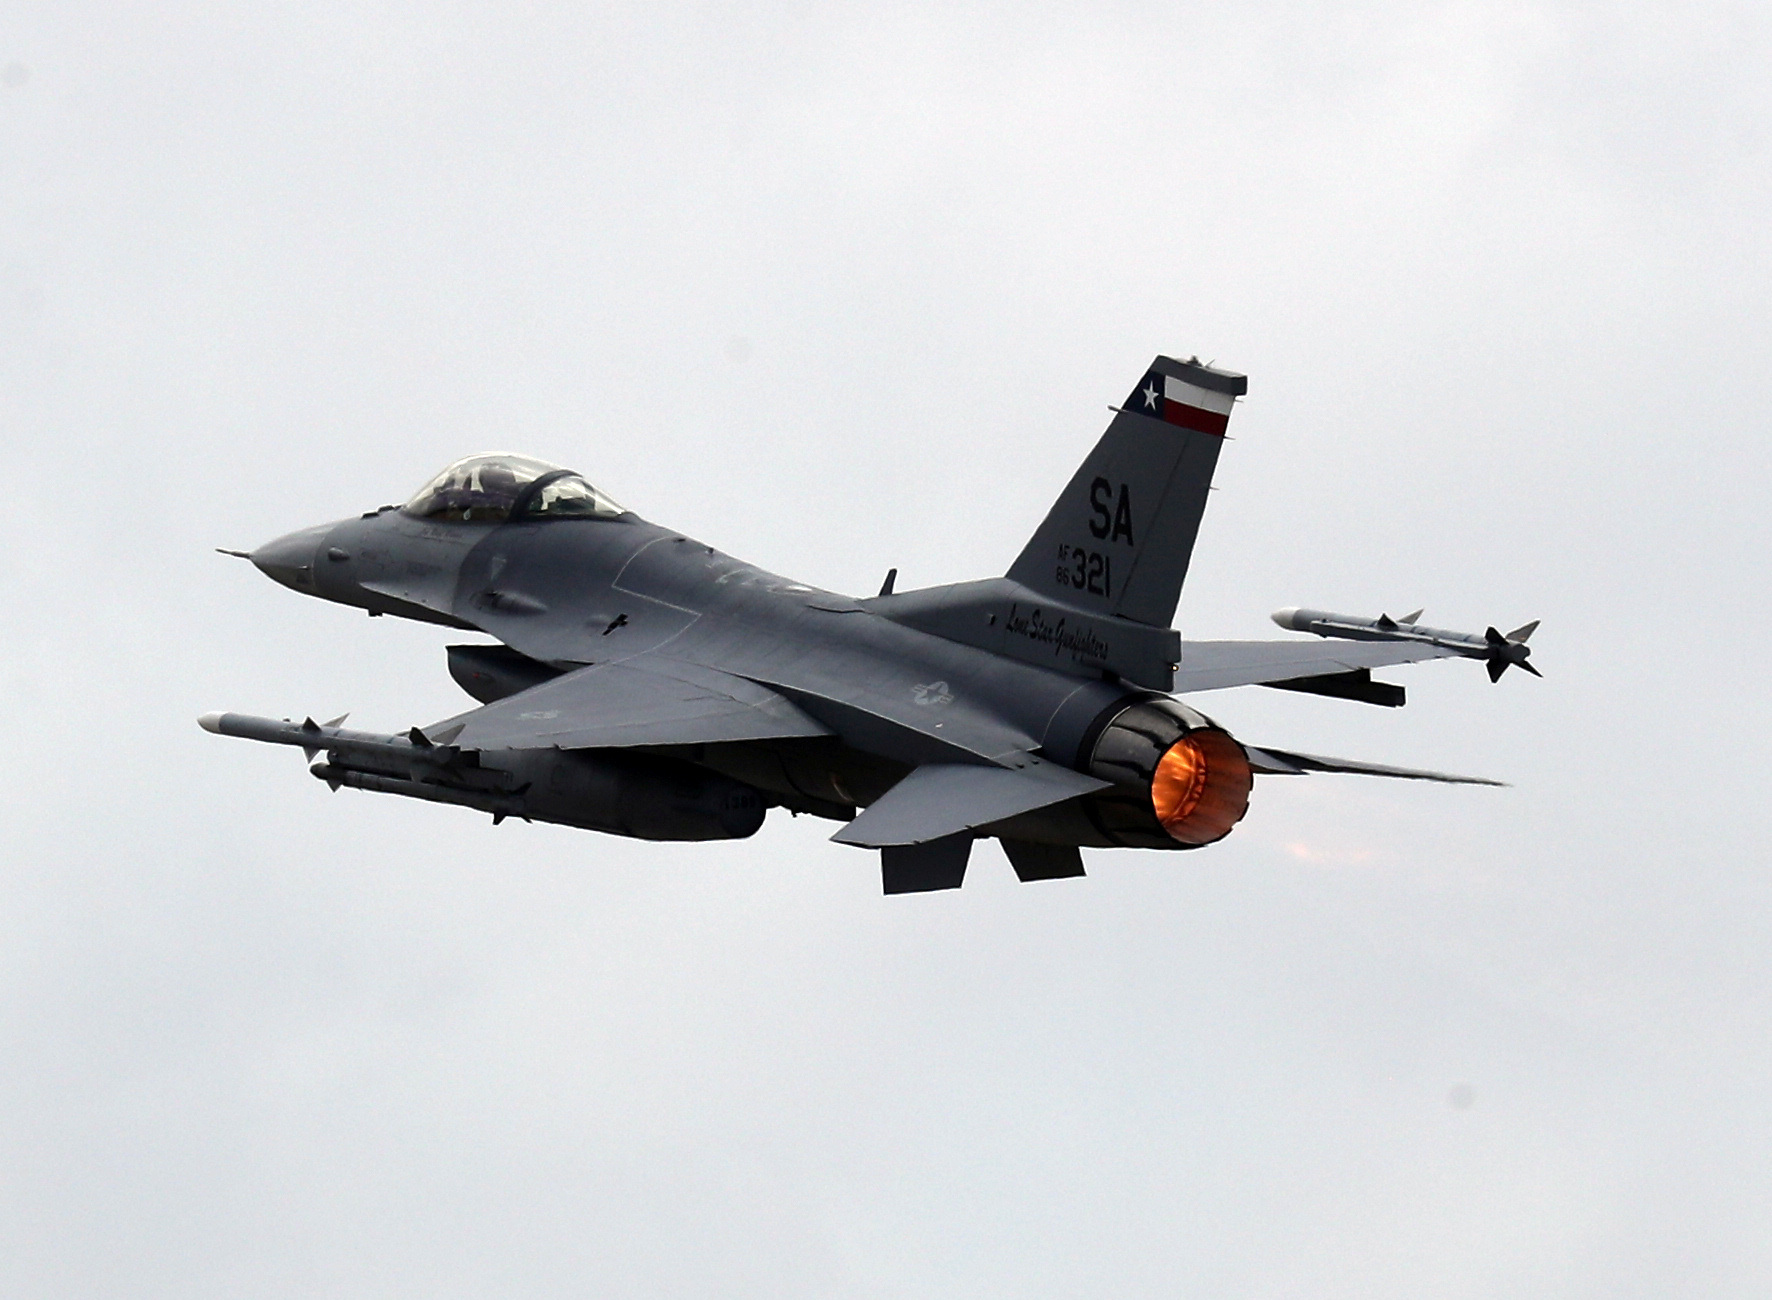 A U.S. Air Force F-16 jet fighter takes off from an airbase during CRUZEX in Natal